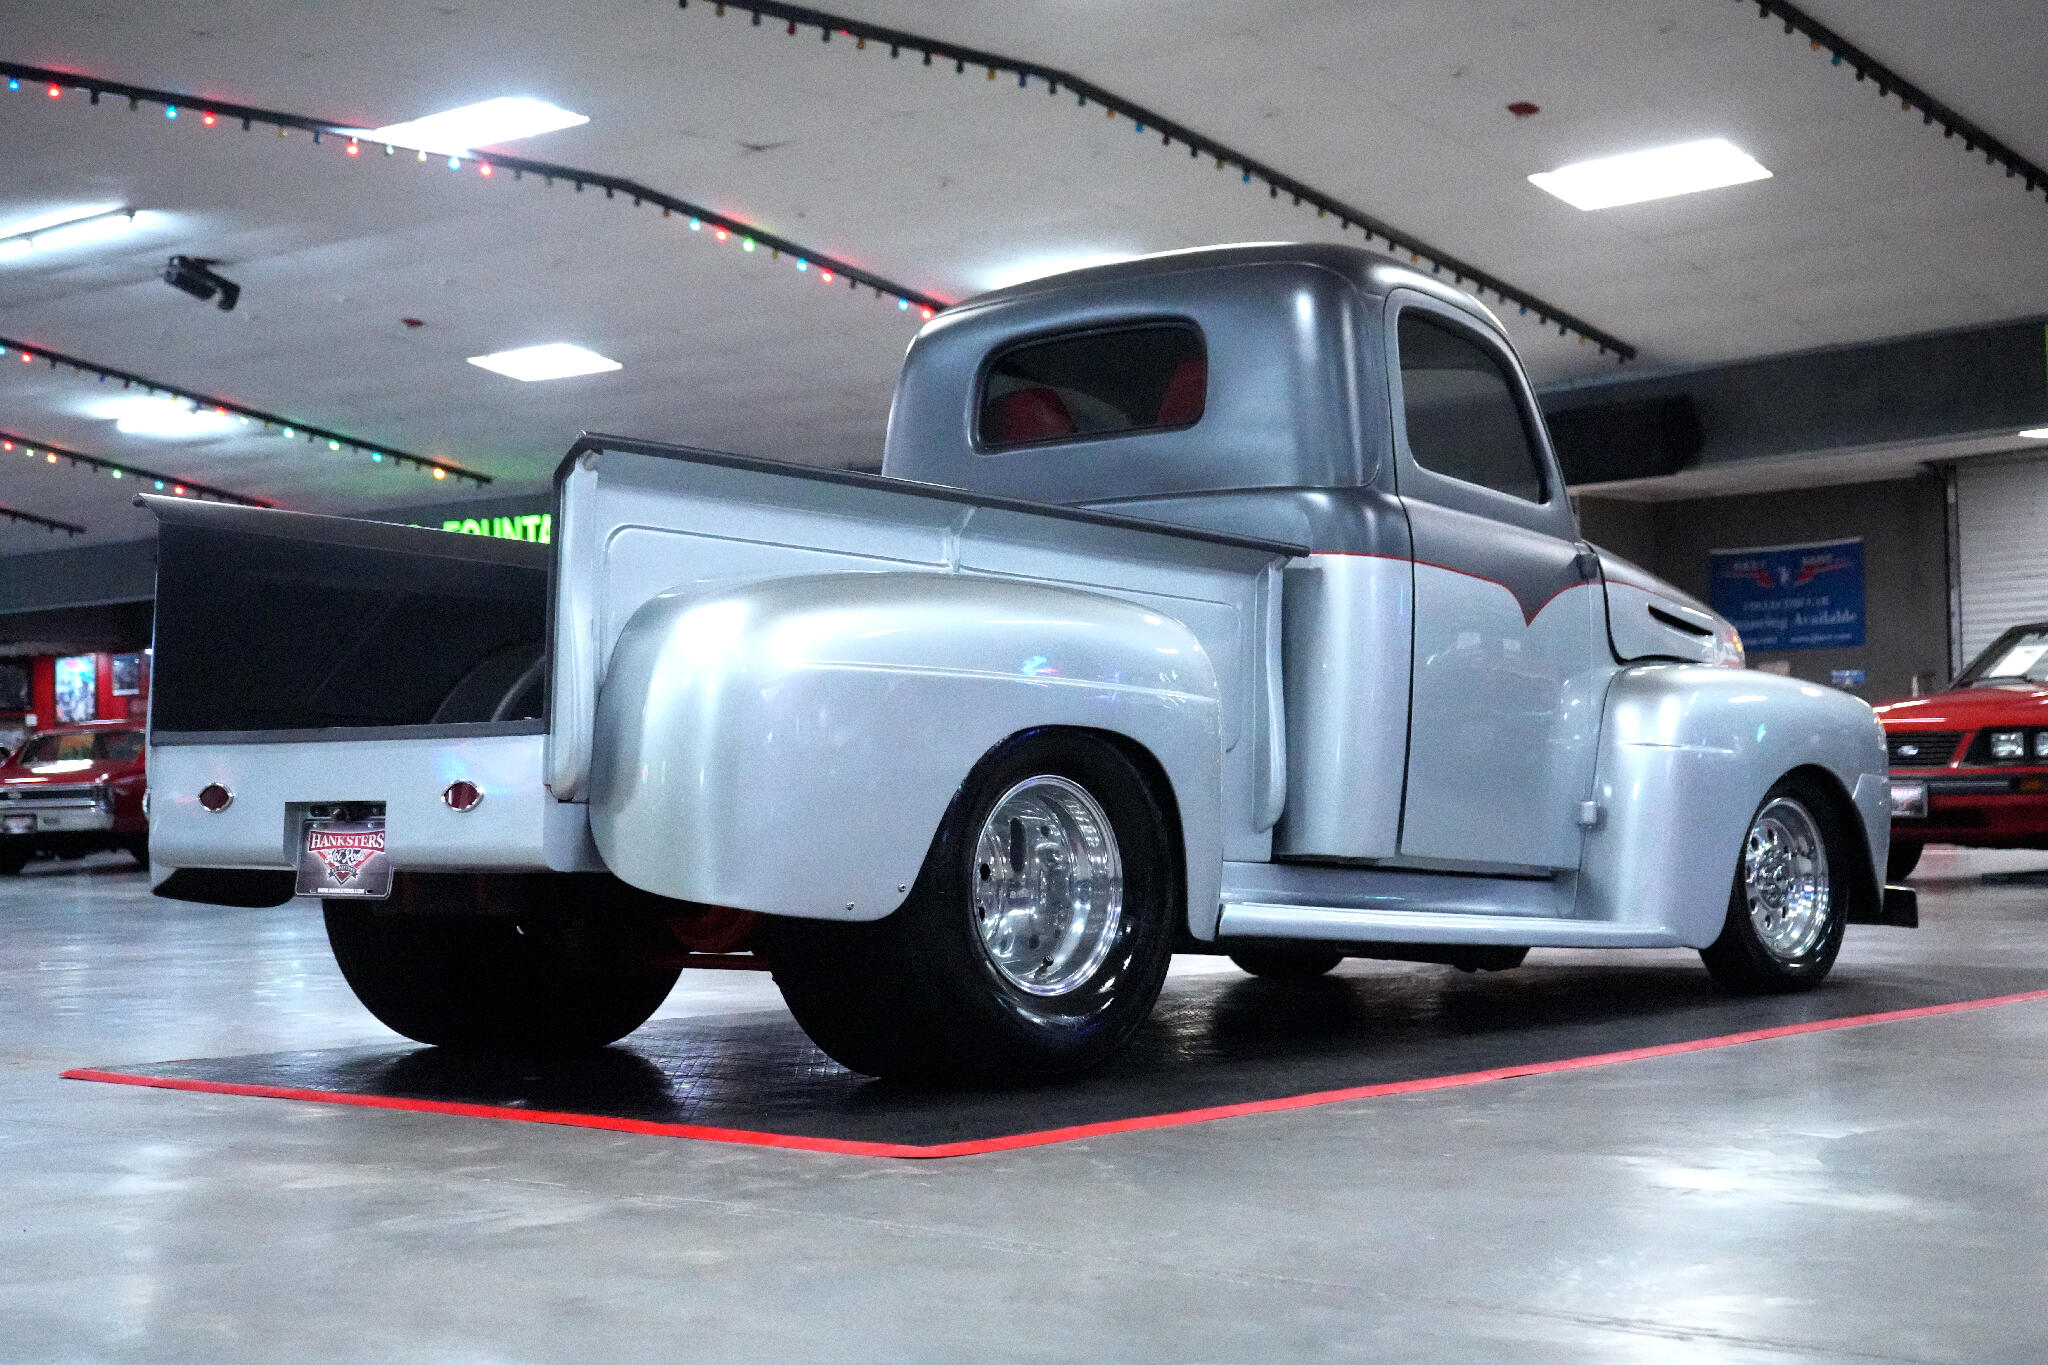 1949 Ford F-1 15